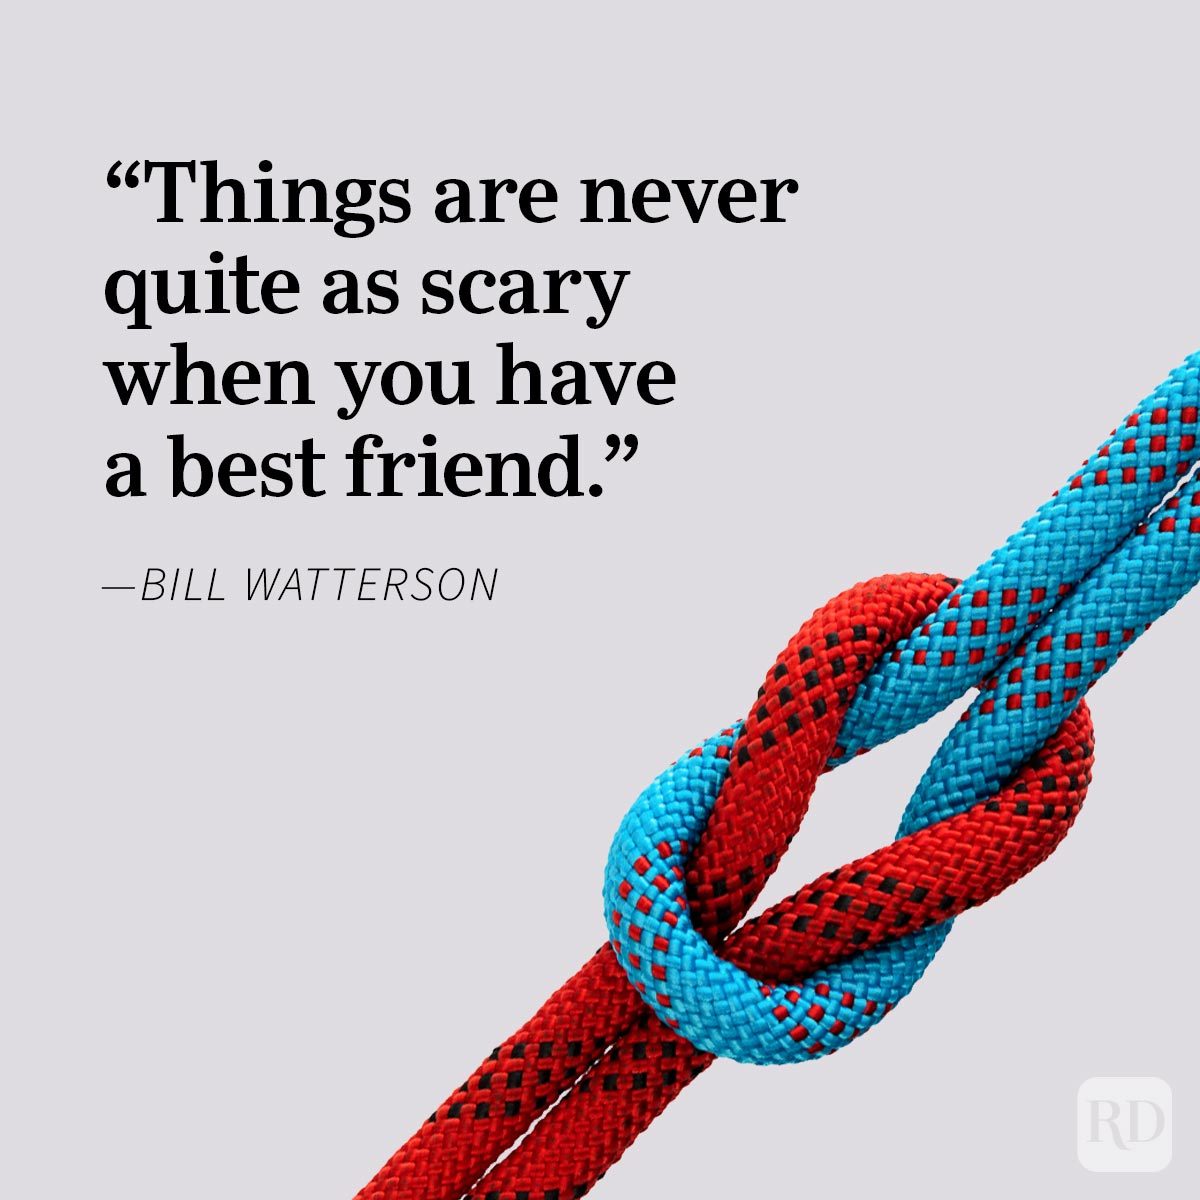 Friendship Quotes To Share With Your Bestie Bill Watterson, red and blue roped tied knotted, purple